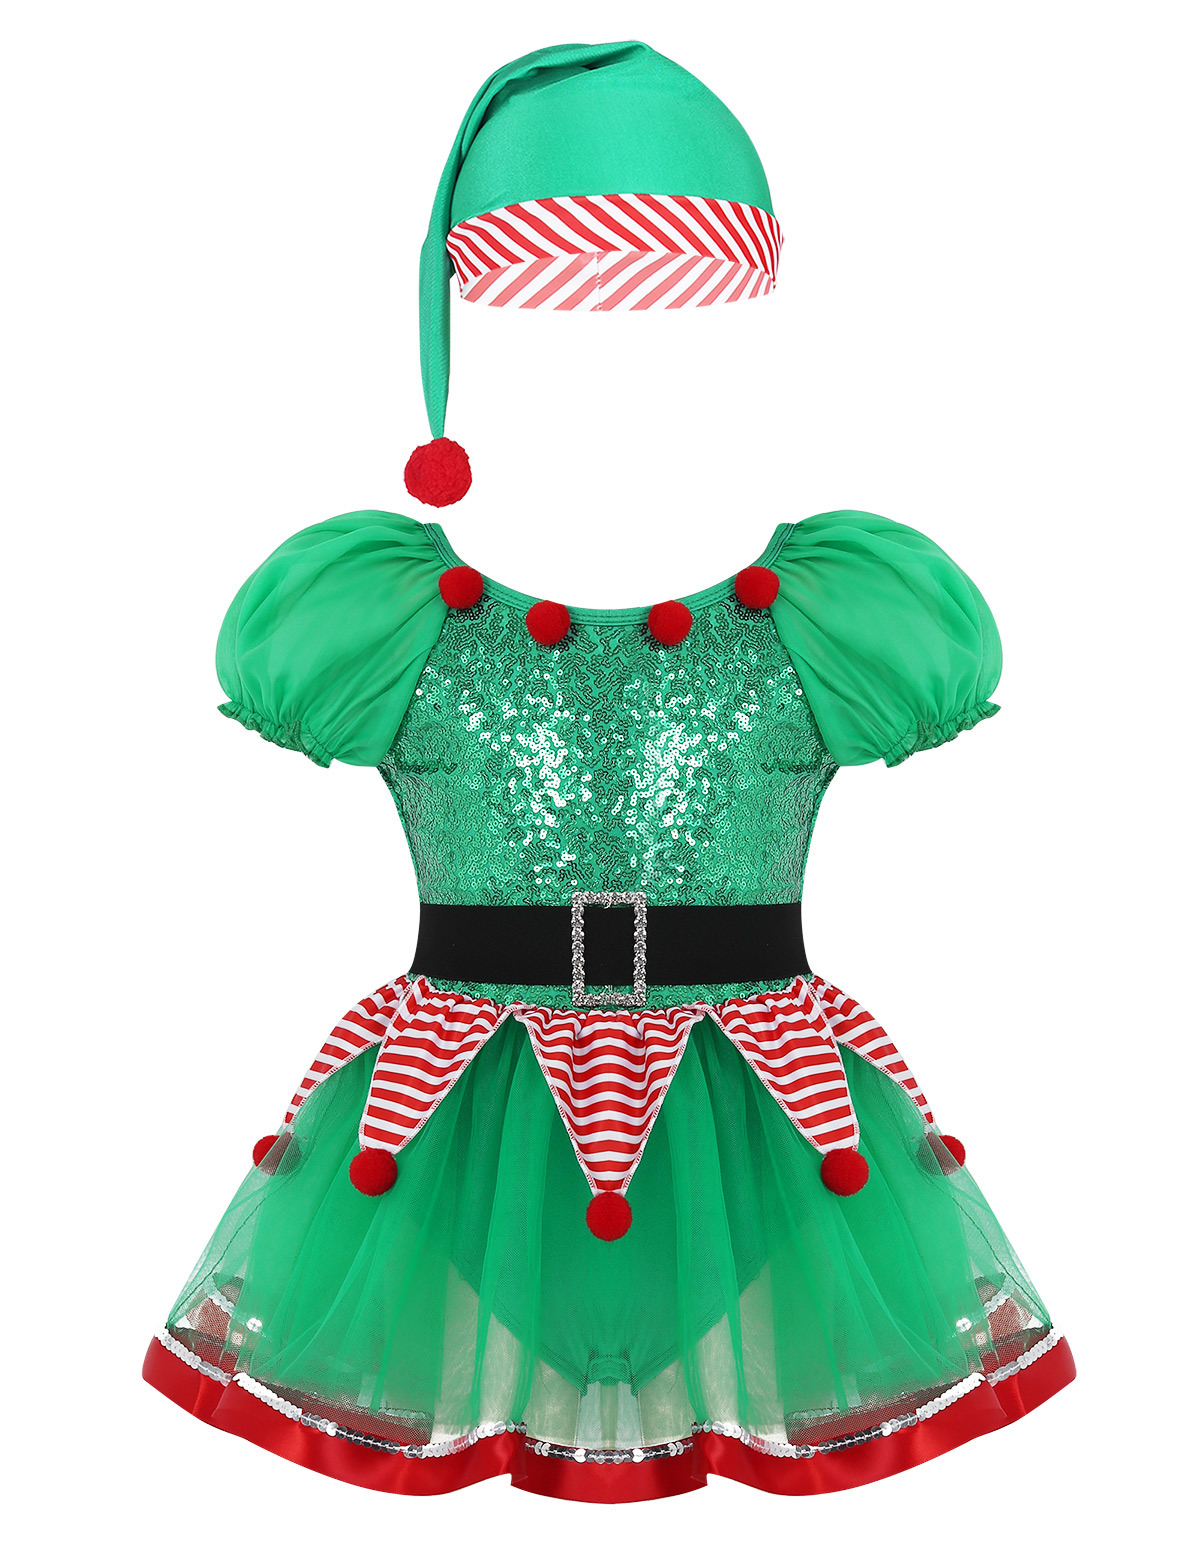 inhzoy Kids Girls Christmas Elf Cosplay Costume Xmas Outfits Sequin Tutu Dress Green 7 - image 1 of 7